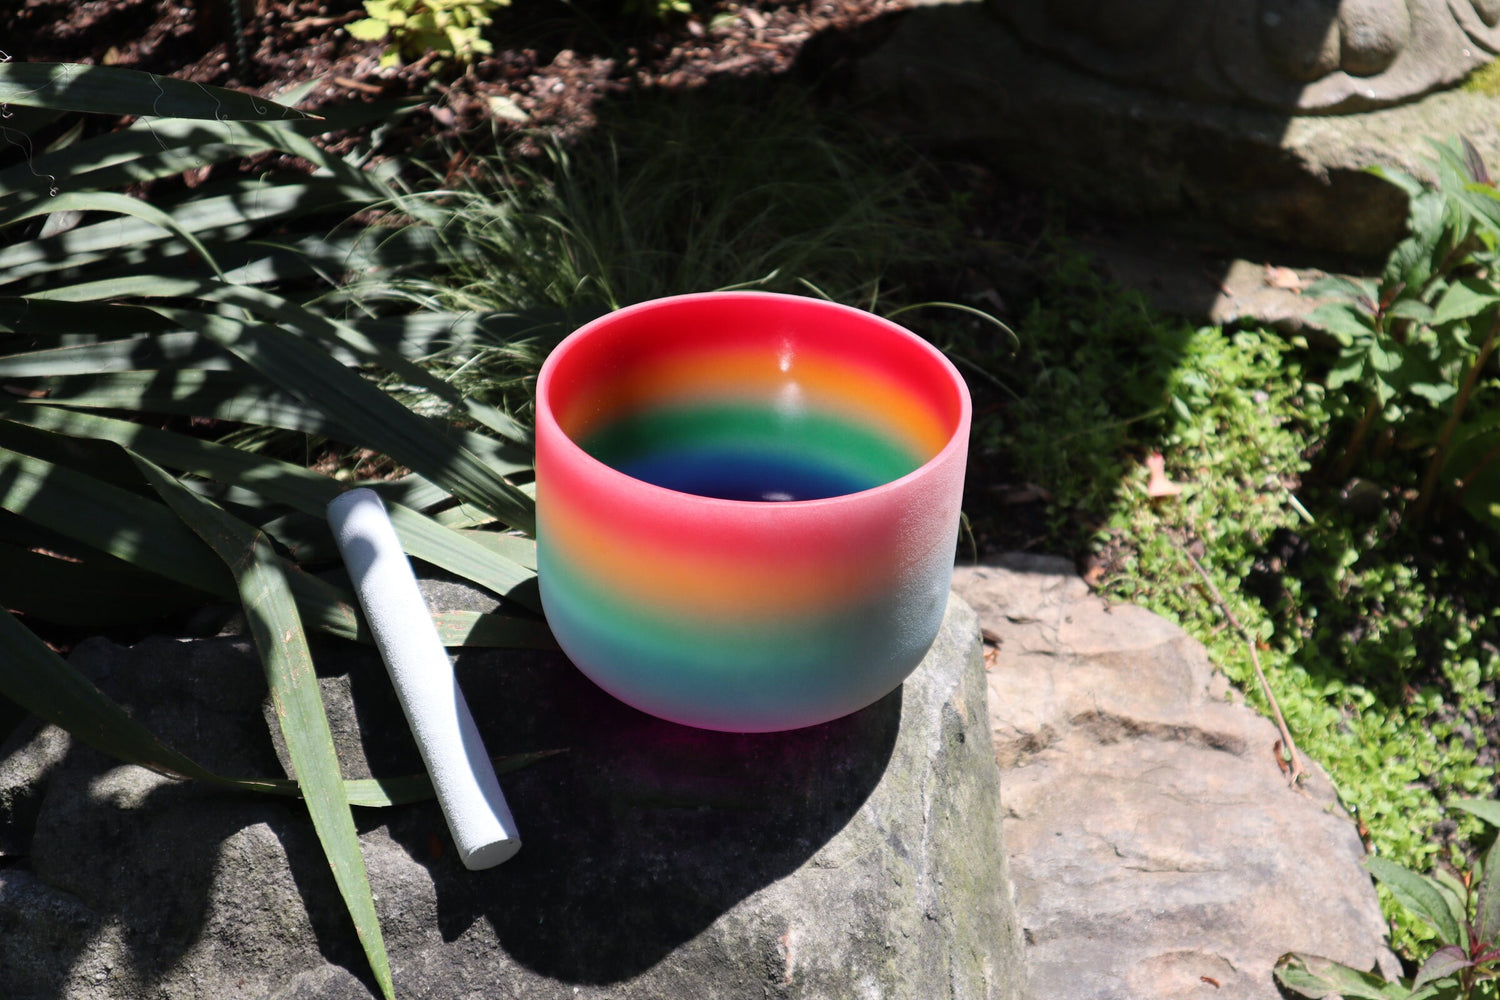 432hz Rainbow - 8” Crystal Singing Bowl And 528 Hz Solfeggio Tuning Fork - 99% Quartz Crystal, Suede Striker, With Padded Carry Case